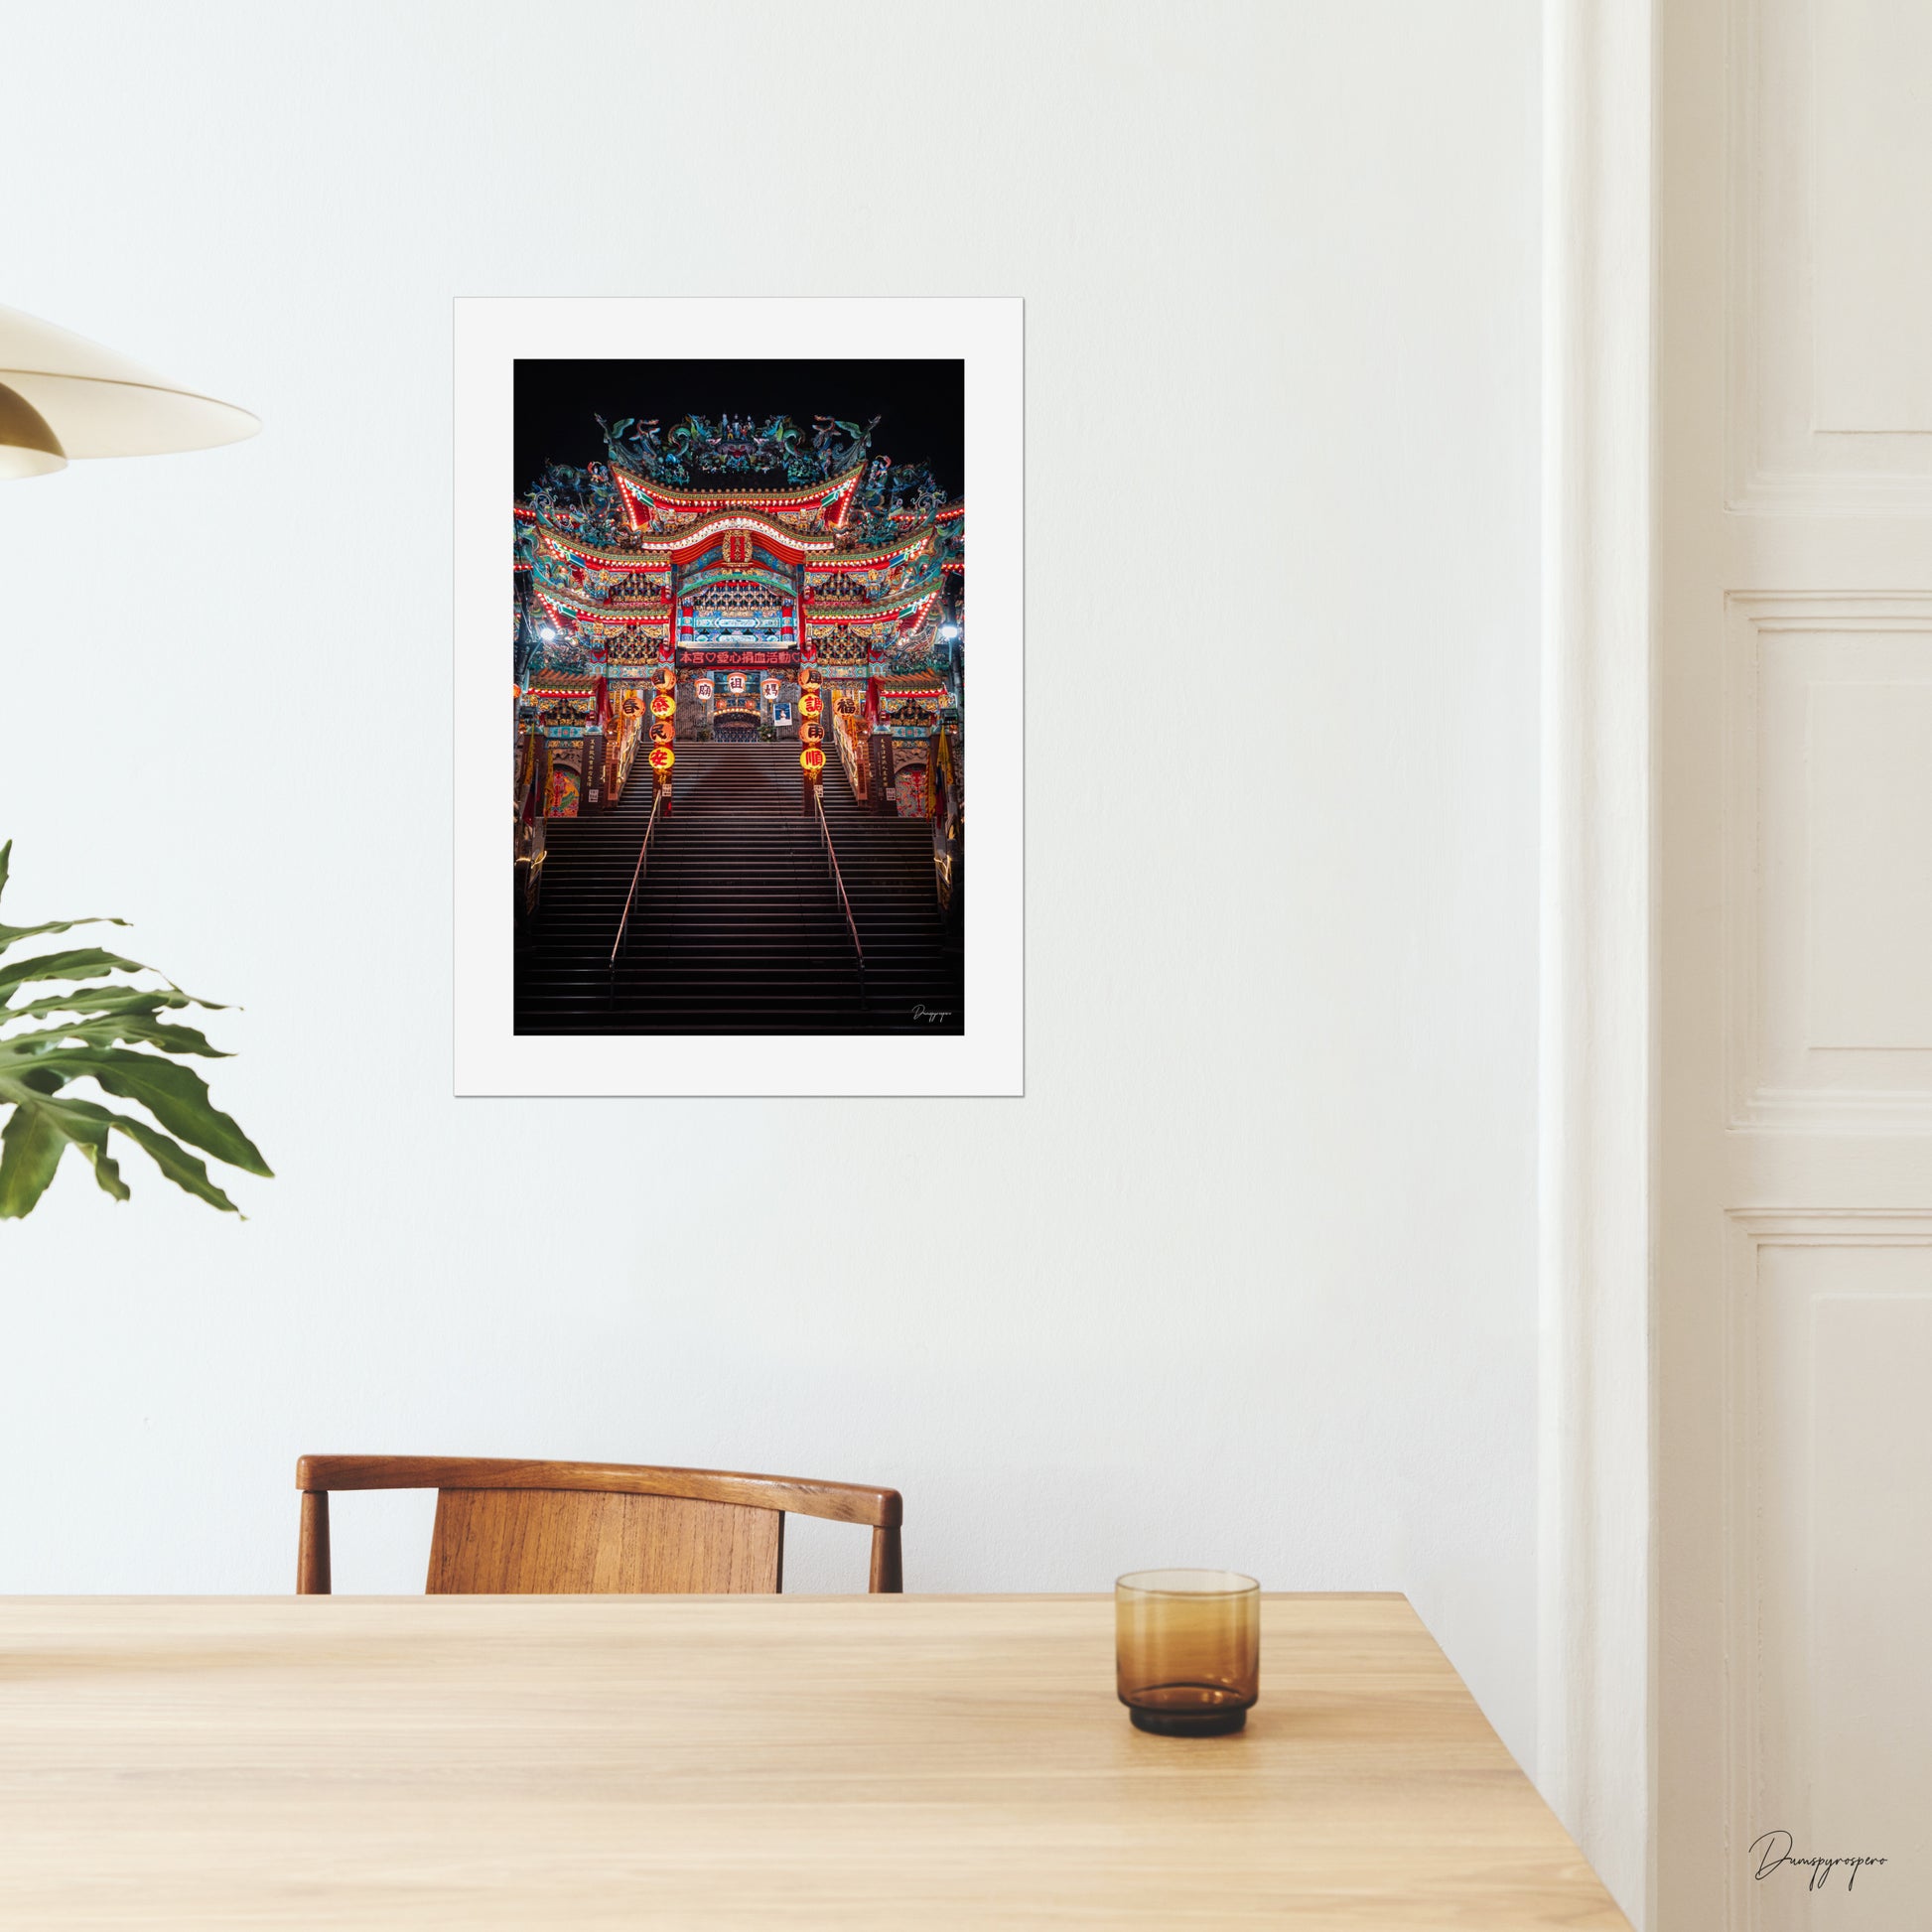 A mockup of a big poster on the wall of a dining room showing a very impressive Taoist temple with lights that are glowing in the night in Taipei Taiwan